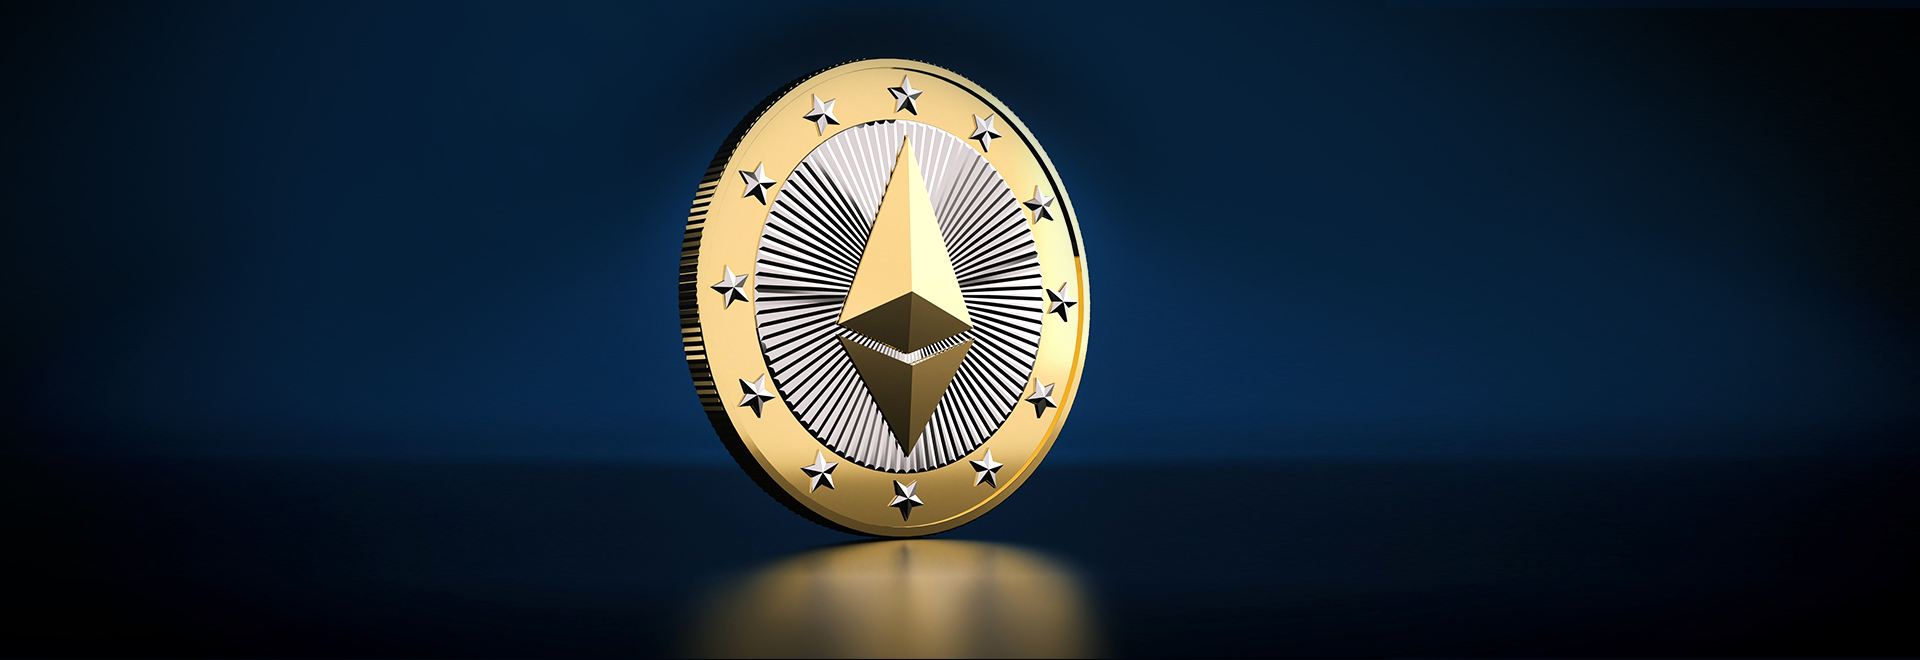 Ethereum Could Affect Other Cryptocurrencies